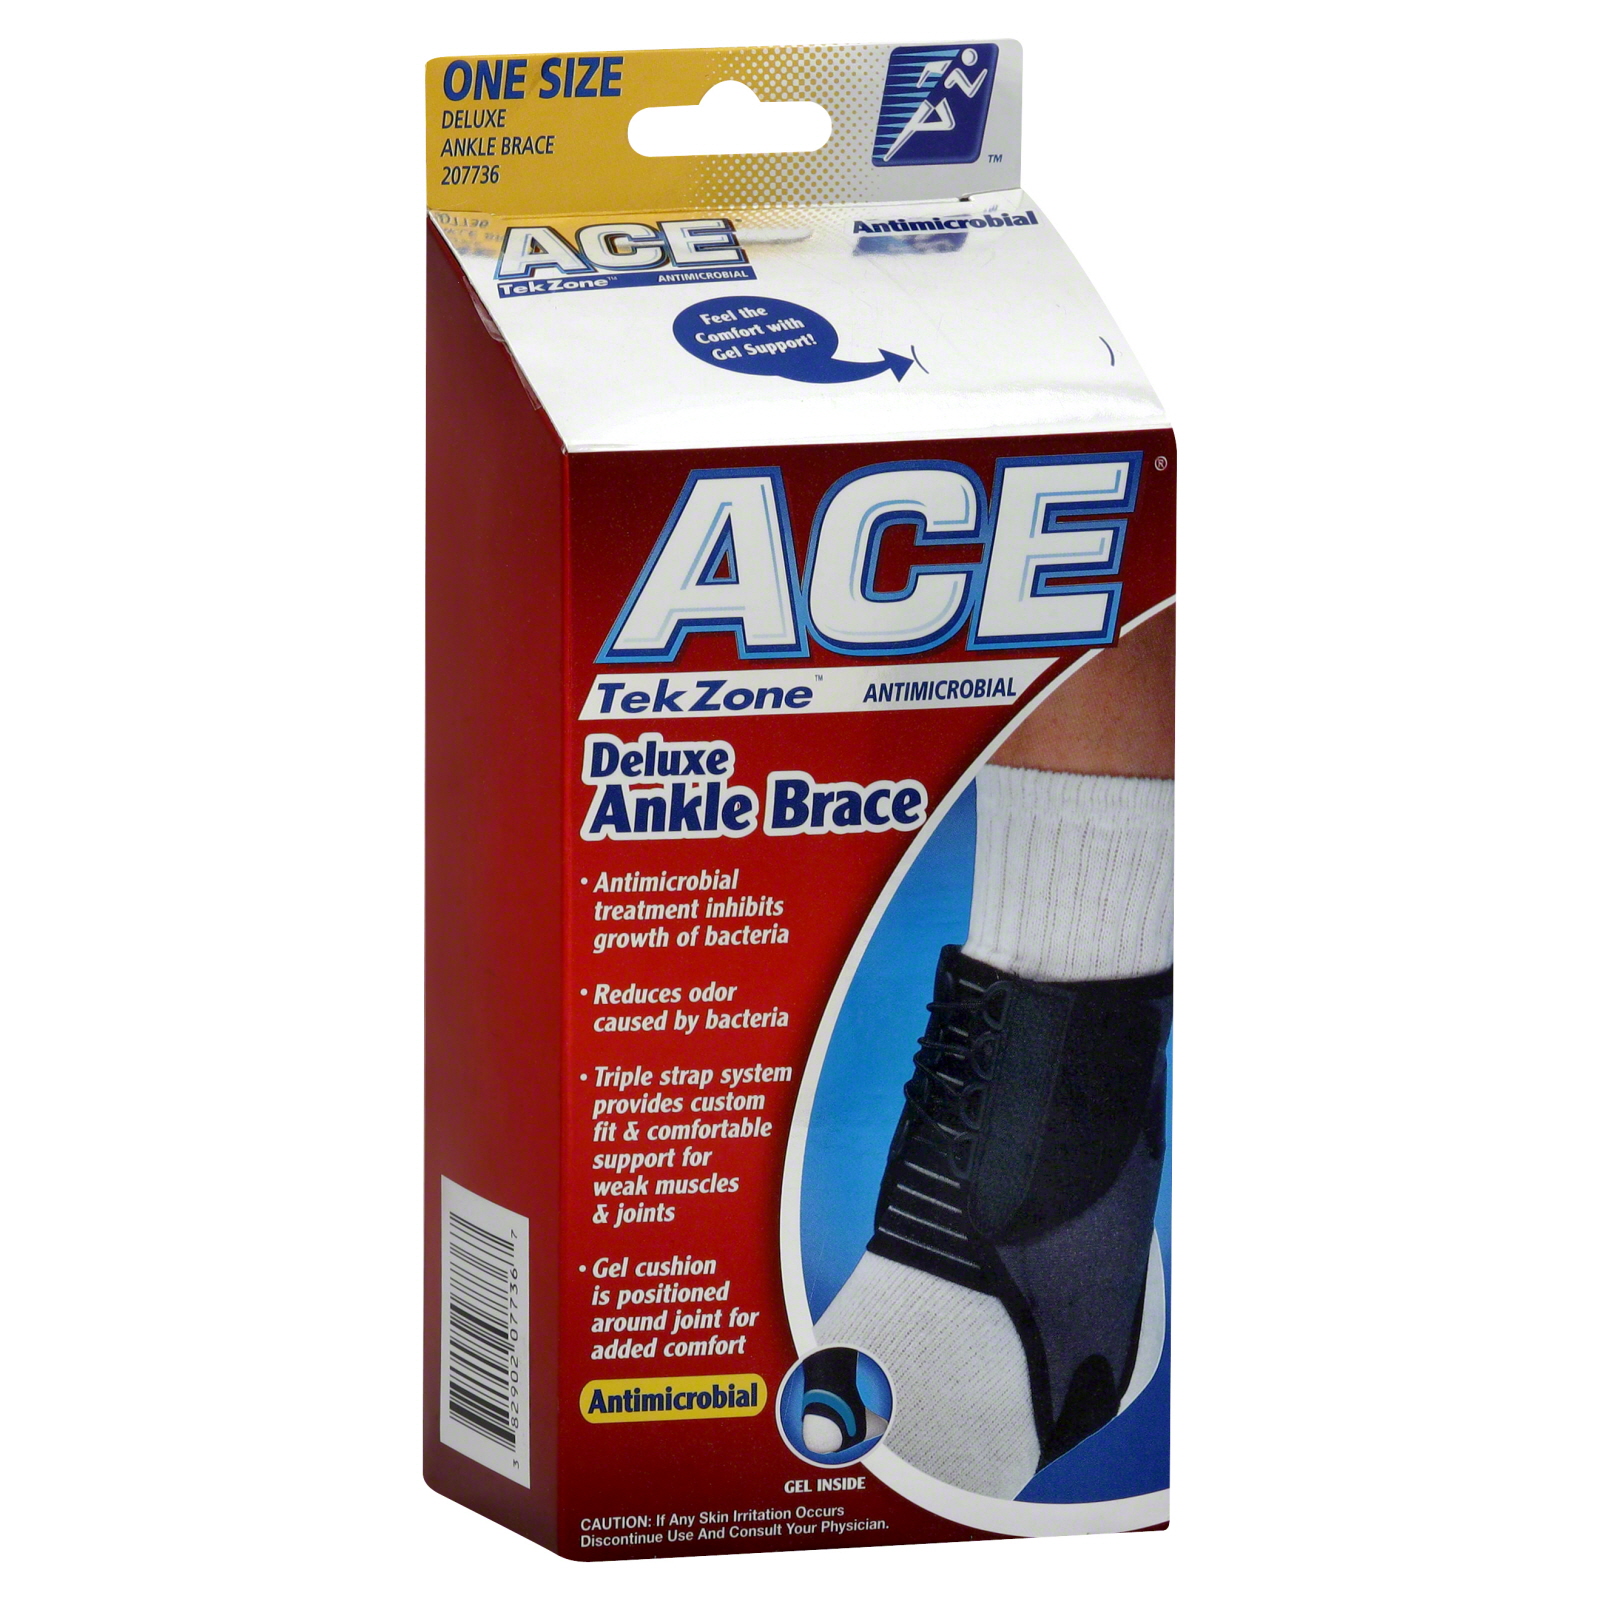 Ace  TekZone Ankle Br, Deluxe, One Size, 1 br